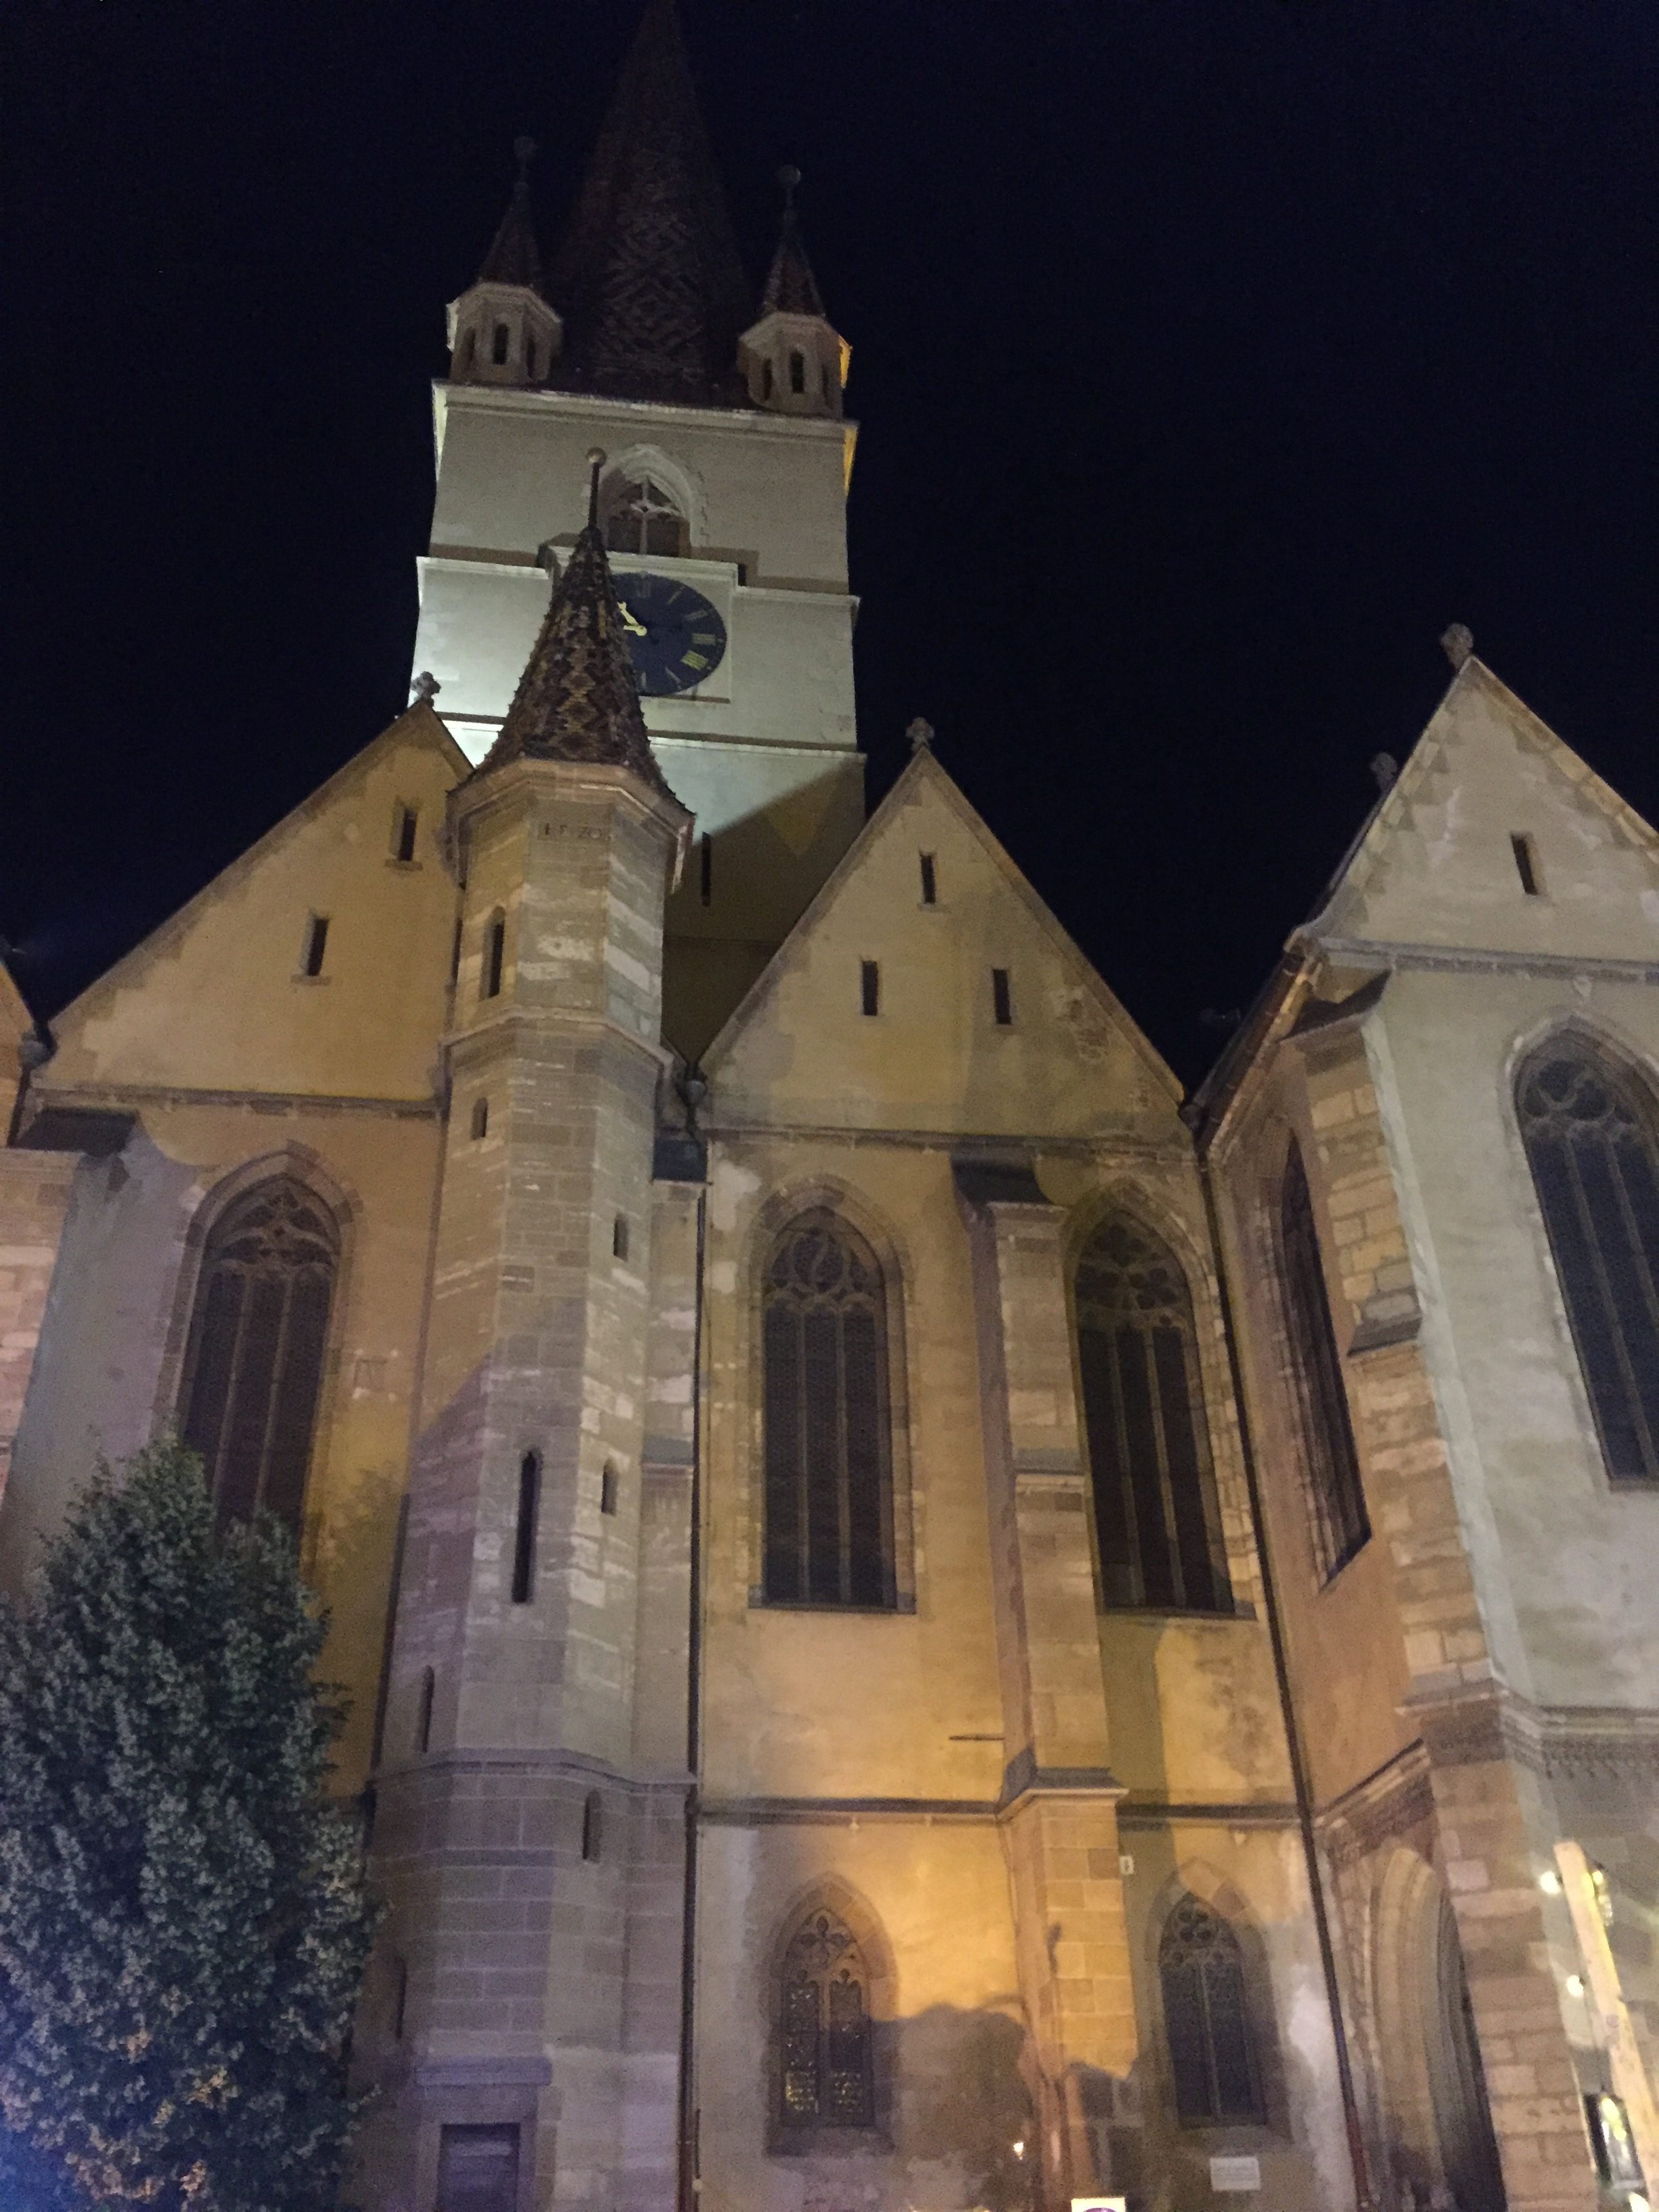 The Evangelical Cathedral at night